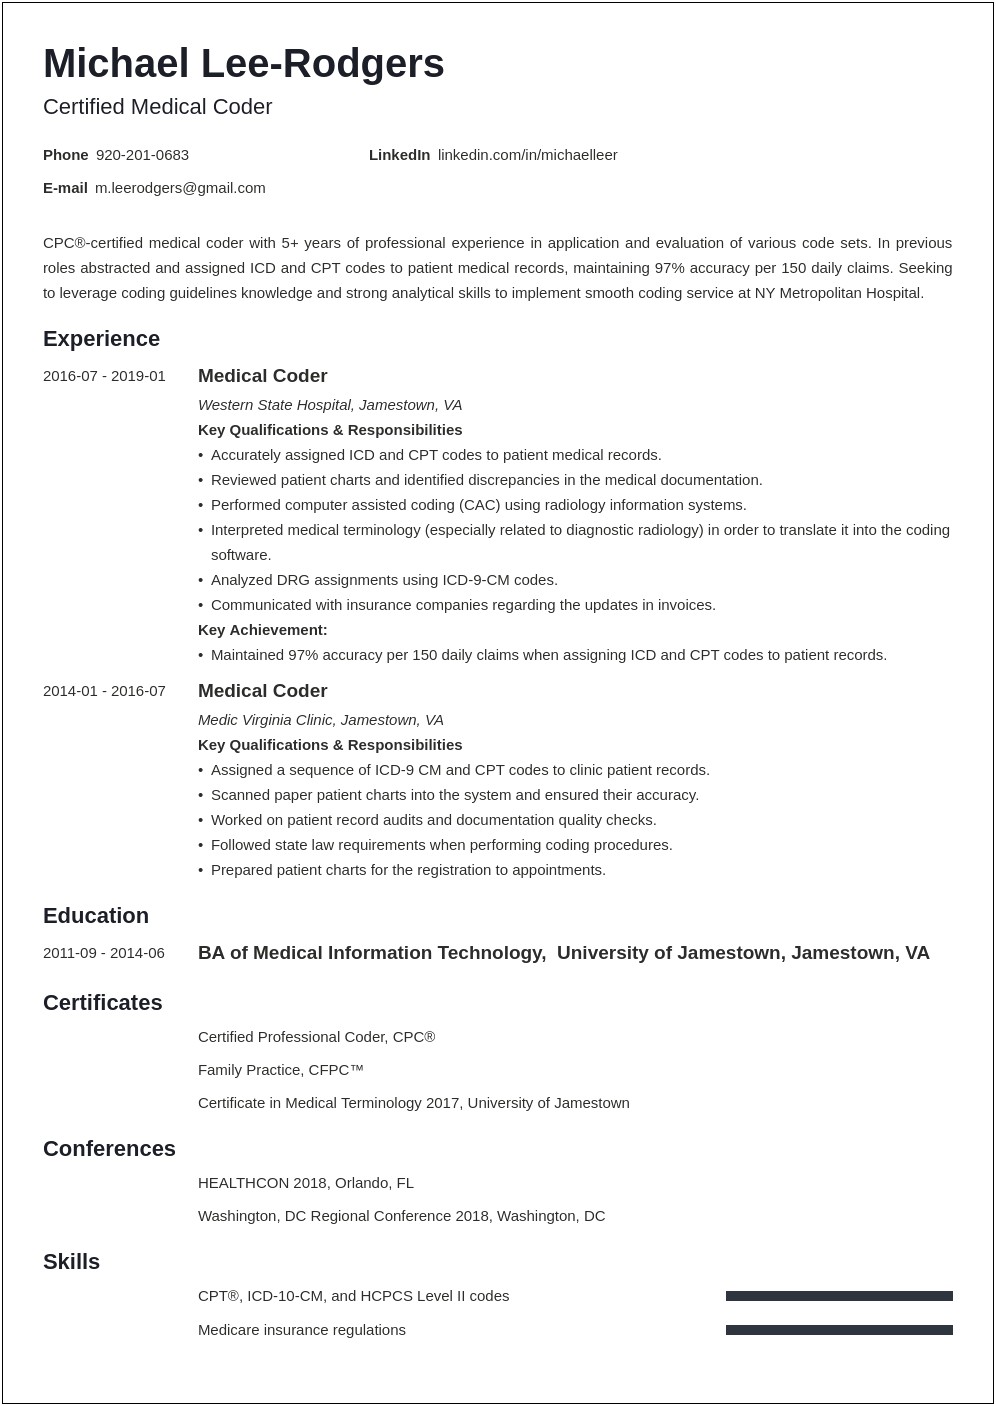 Certified Professional Coder Resume Objective